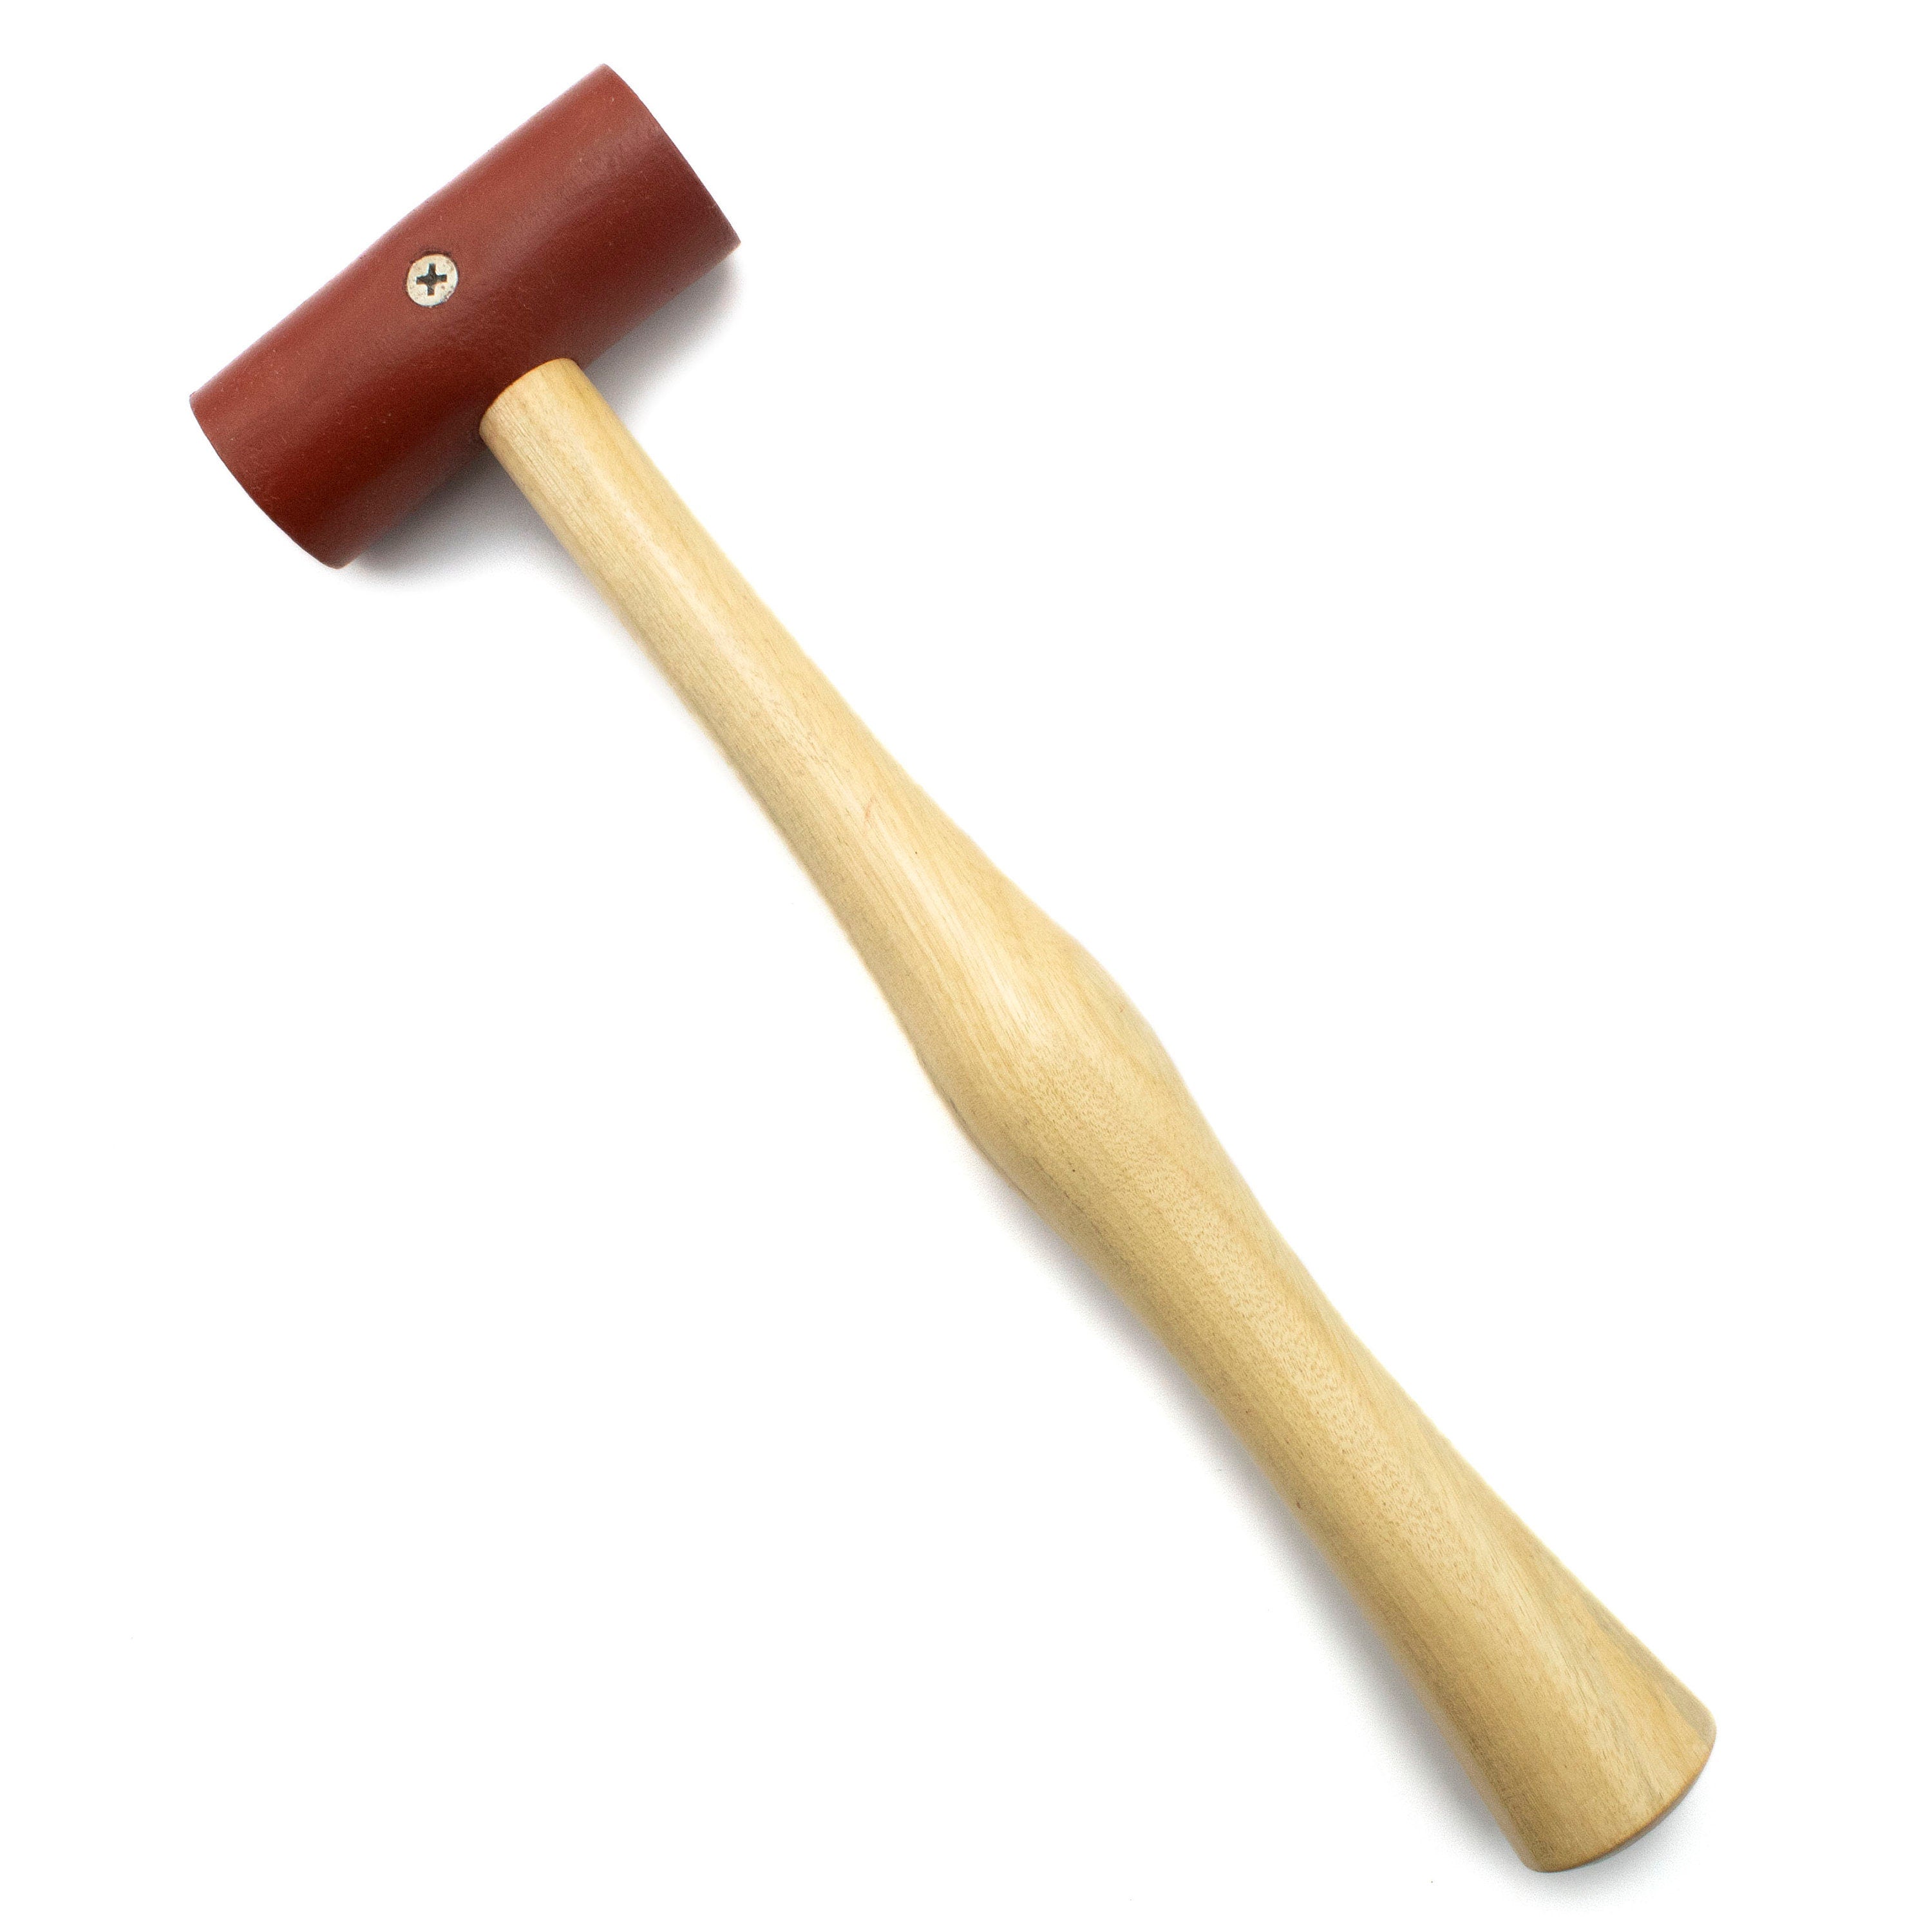 Large Rawhide Mallet - My Pick for Shaping, Forming and Flattening